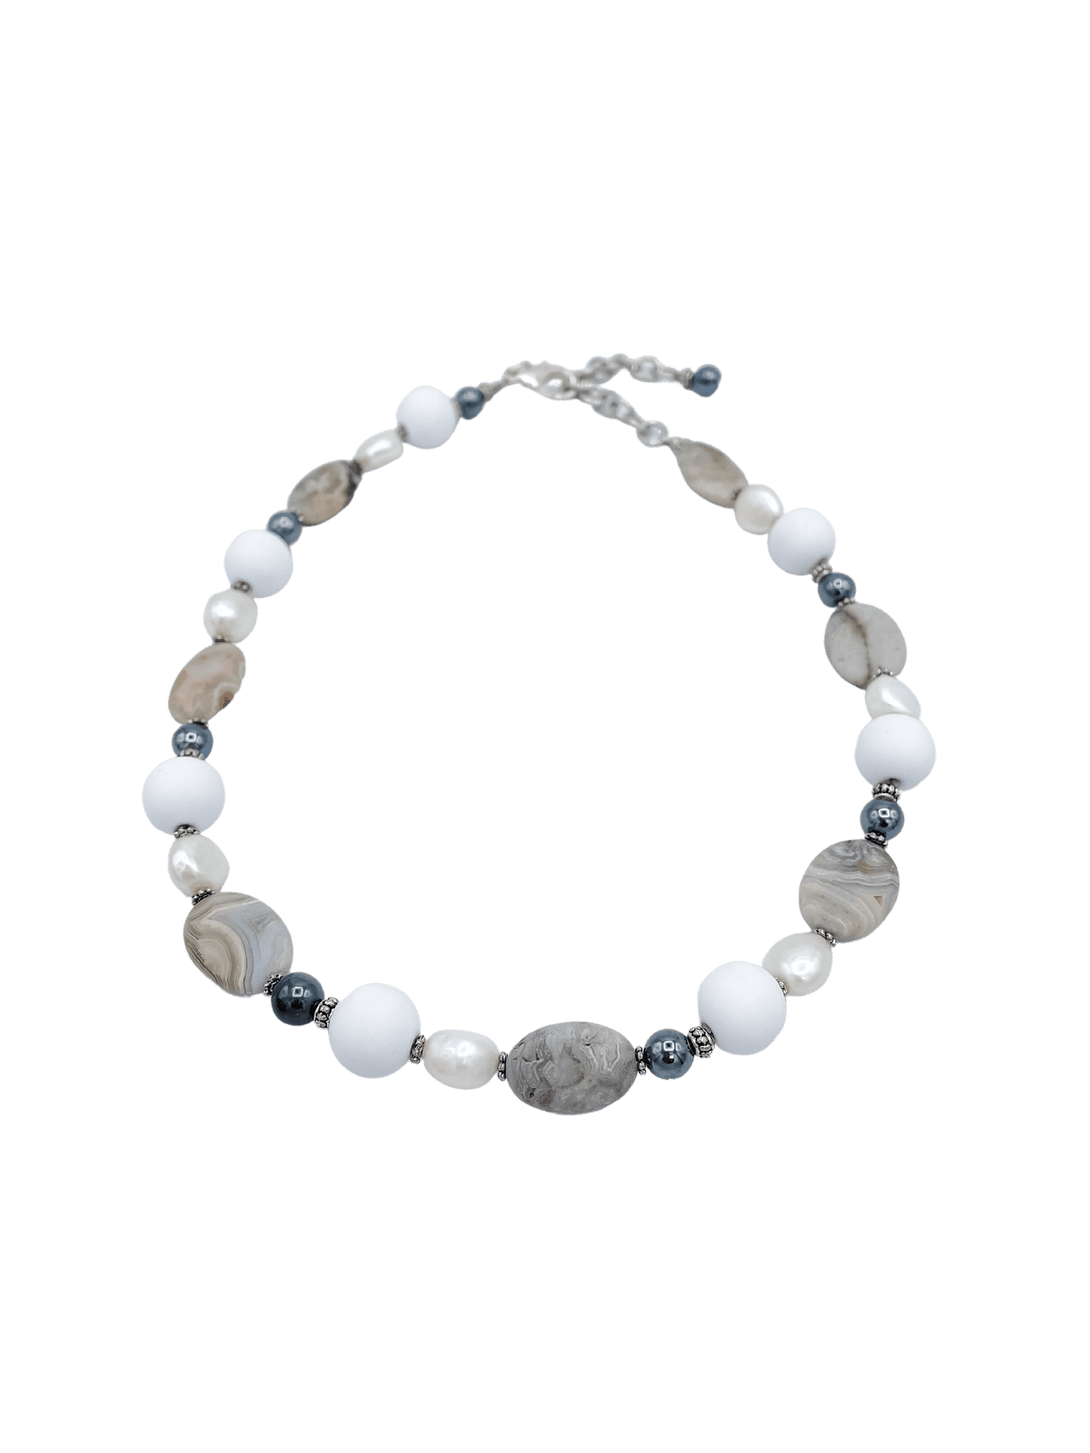 Necklace with Stones, Pearls, and Beads